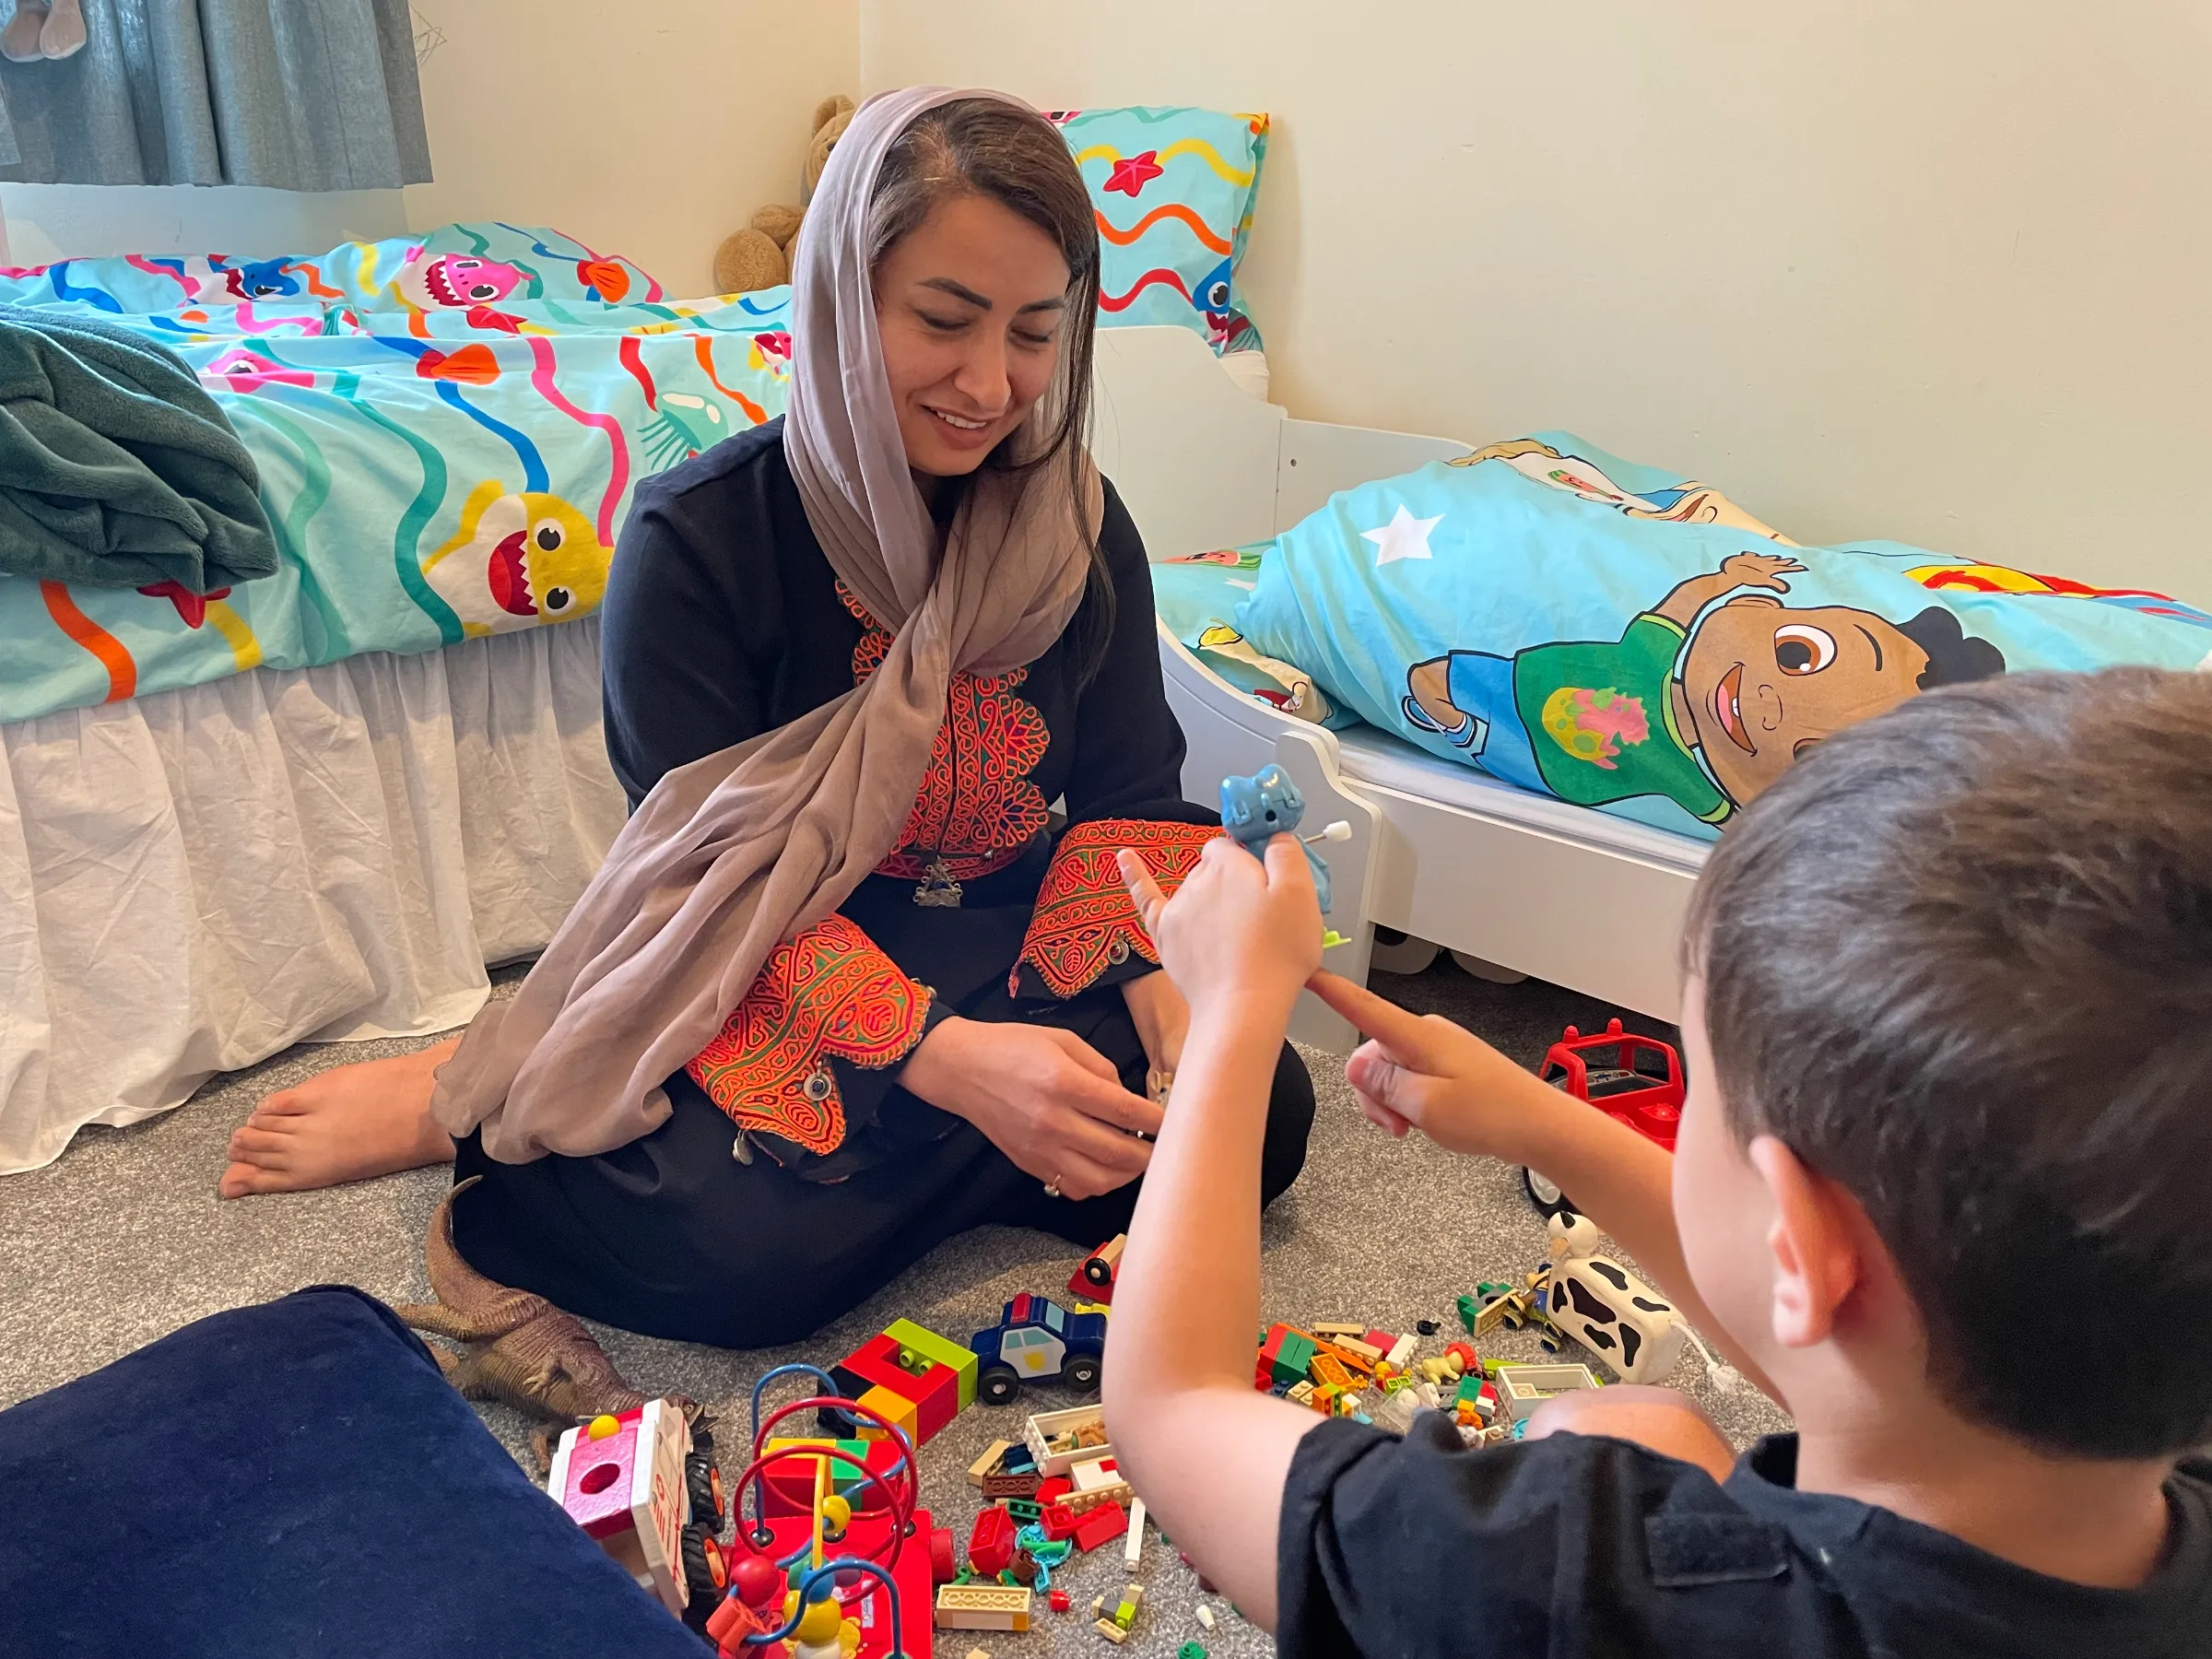 A woman plays with her son in a child's bedroom